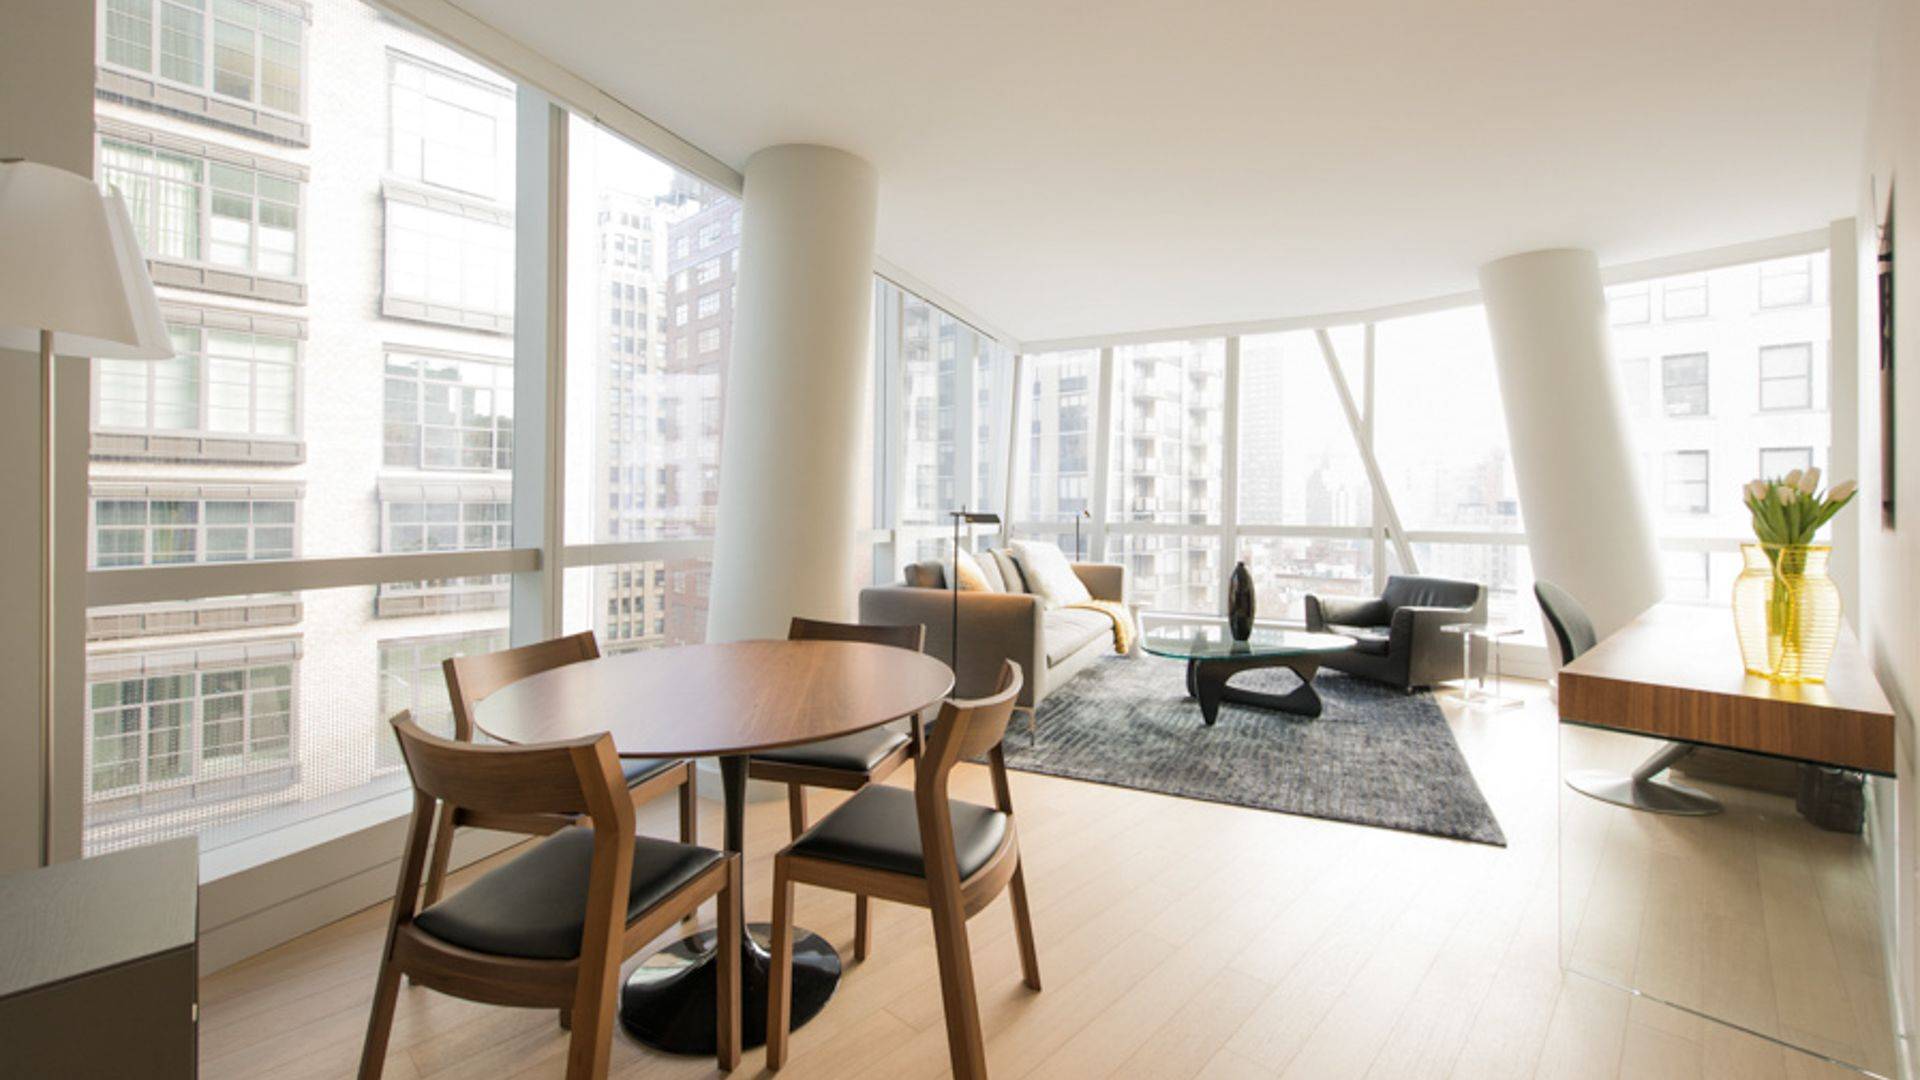 2 Bedrooms & 2 Full Bathrooms with a Private Terrace just steps from Madison Square Park